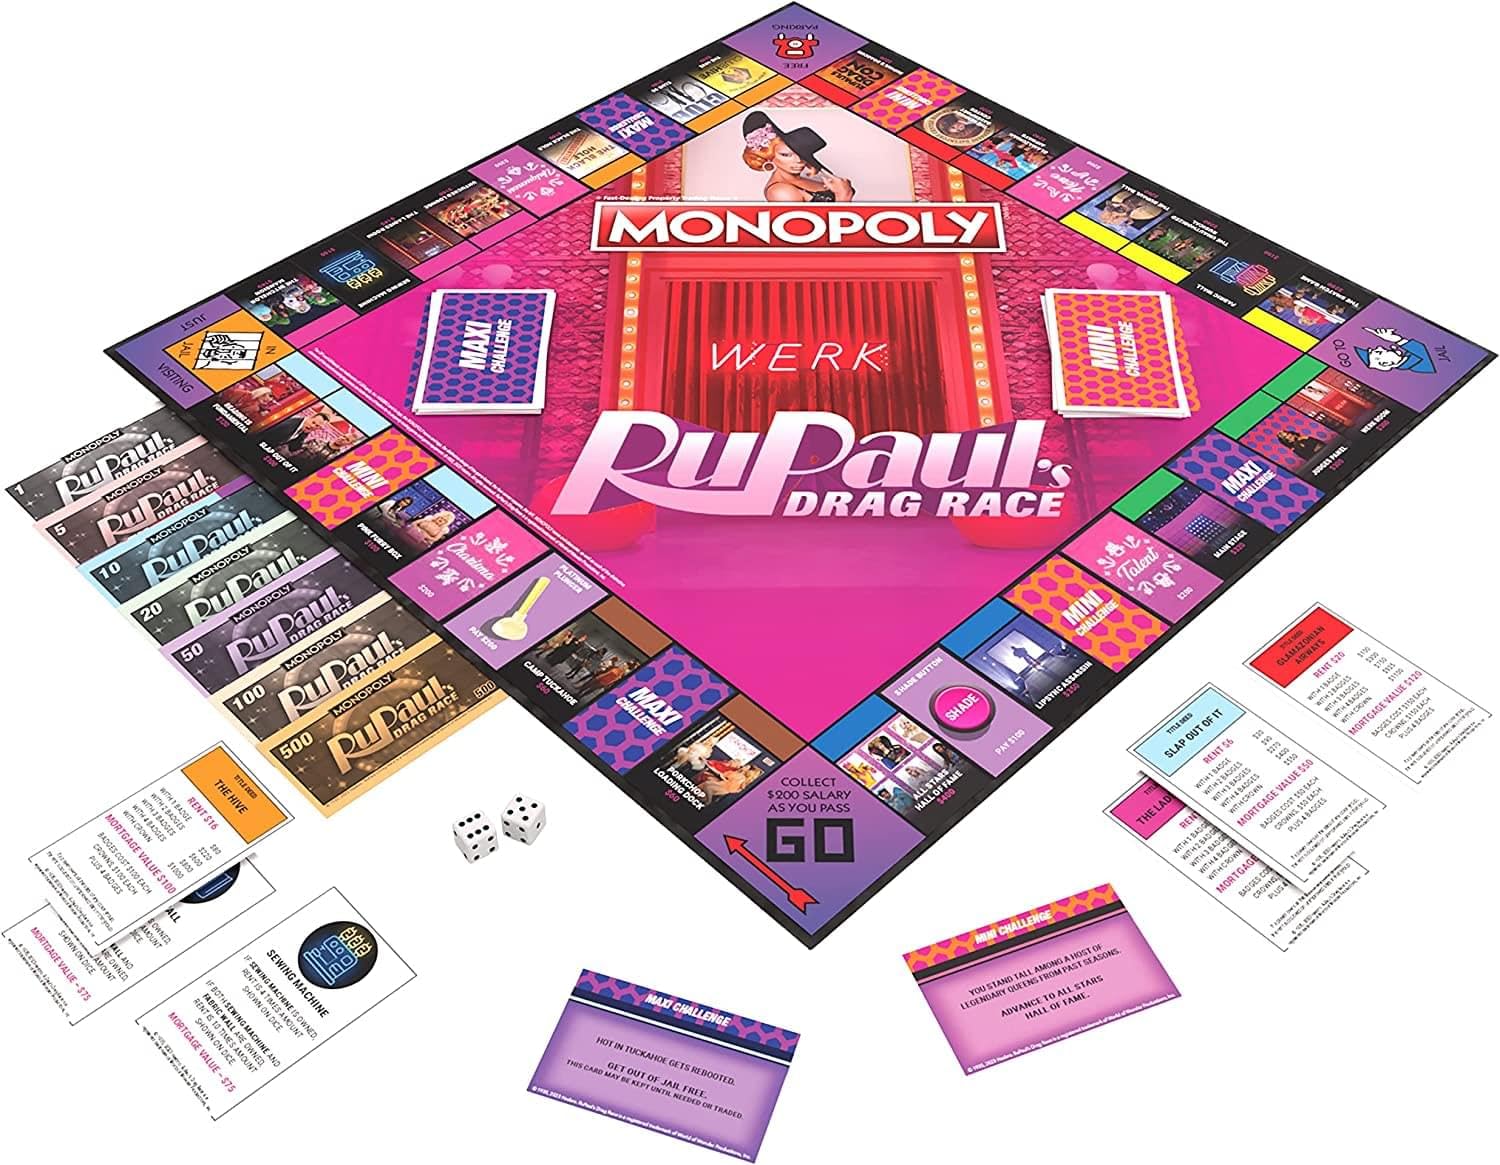 Monopoly RuPaul’s Drag Race | Officially Licensed Collectible Board Game | Play as Checkered Flag, Lipstick, Roll of Duct Tape, and More | Based On Hit Reality TV Series For 6 Players